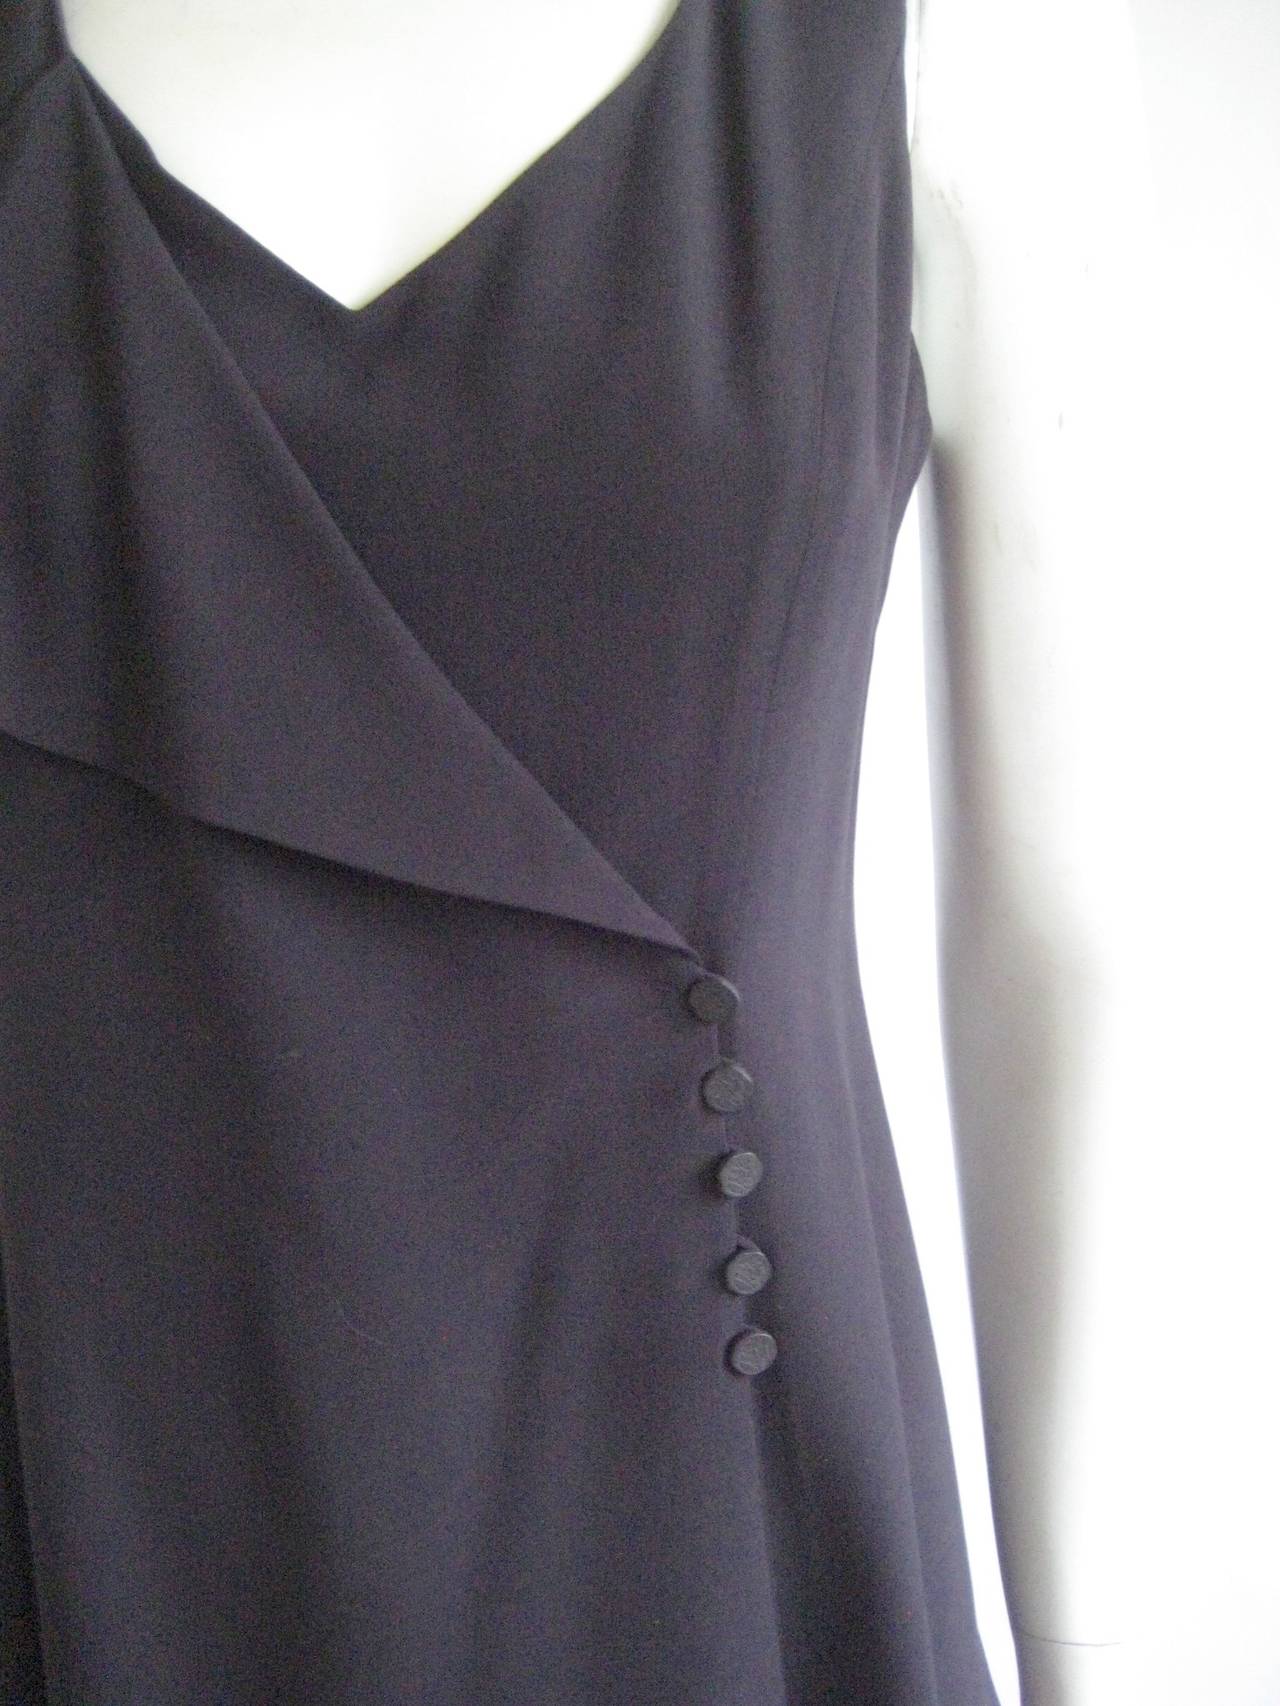 Karl Lagerfeld for Chloe Little Black Dress In Excellent Condition In Chicago, IL